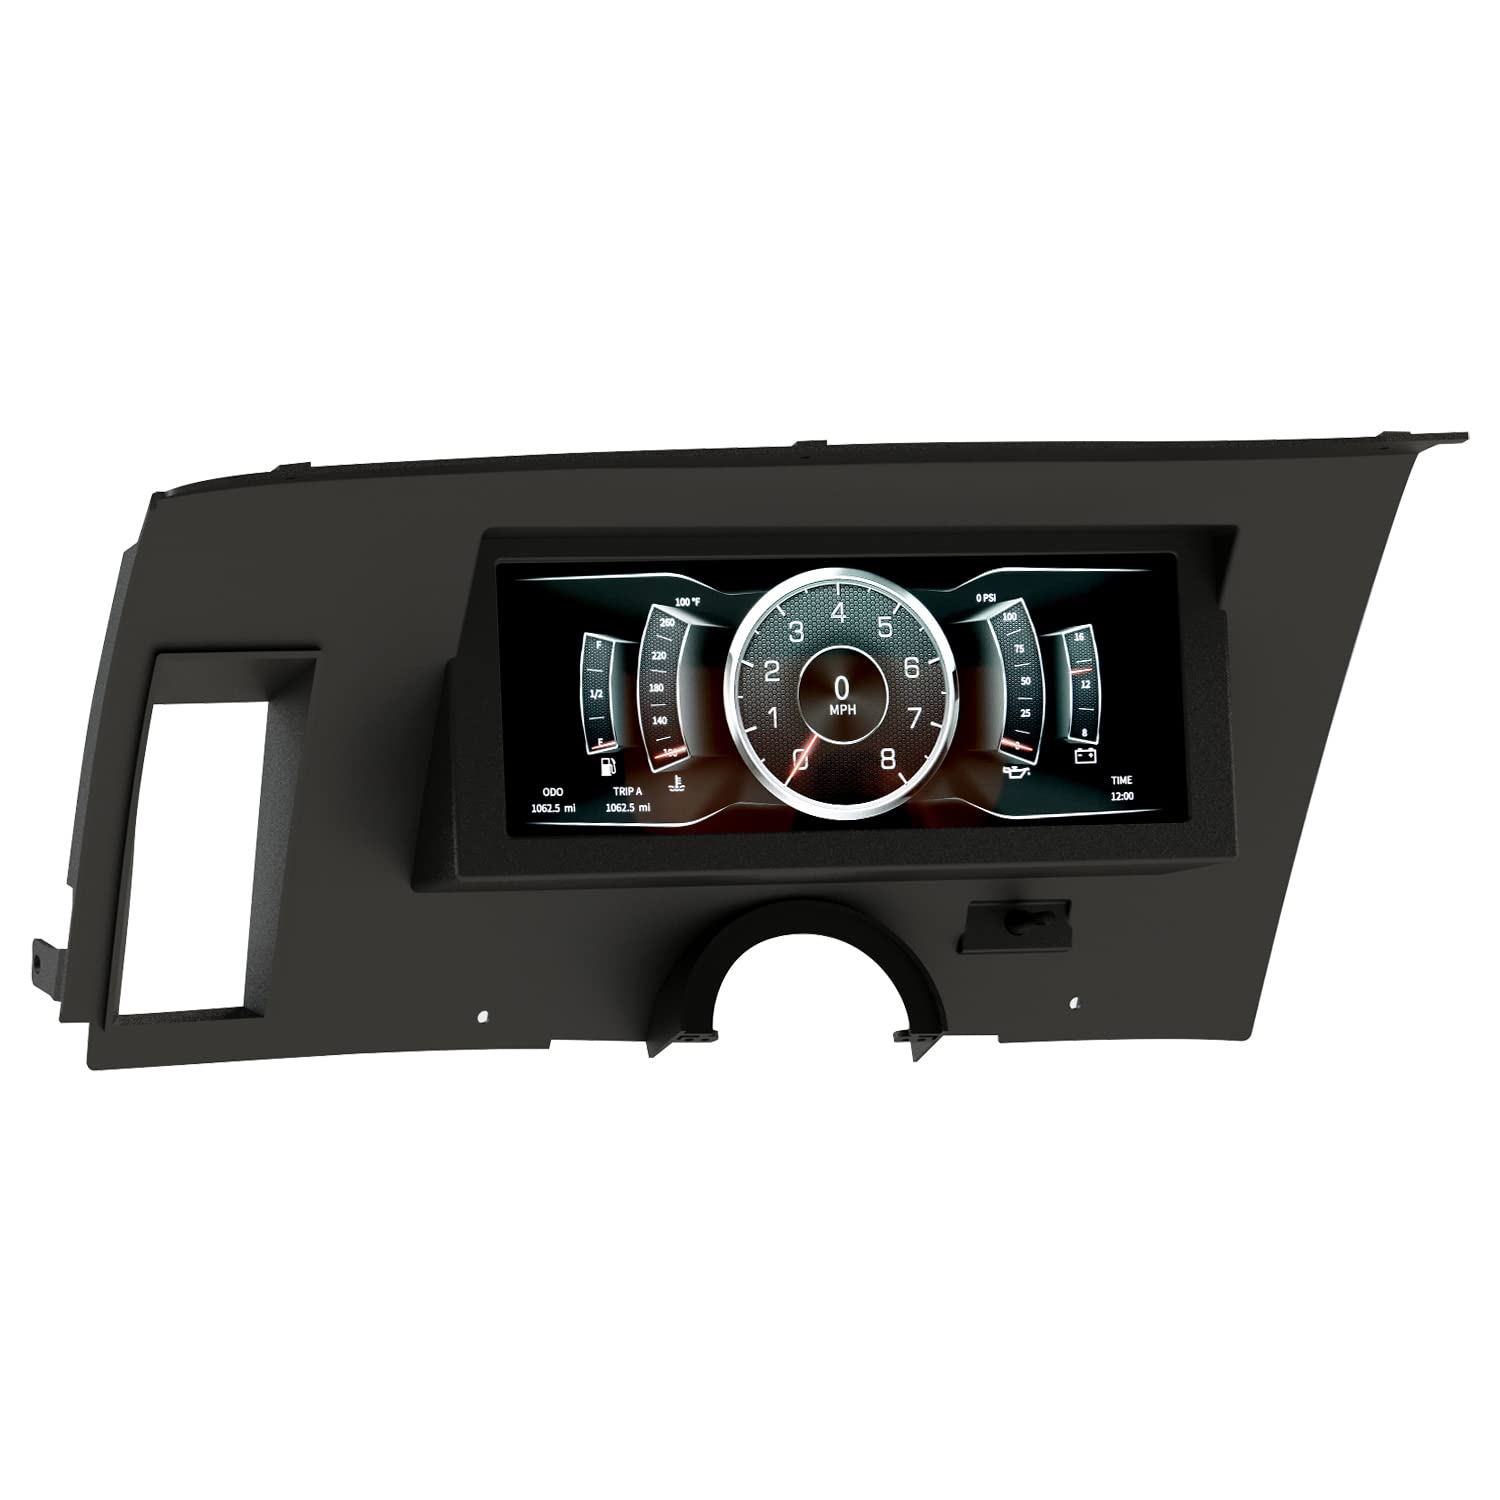 7173 MUSTANG INVISION DIGITAL INSTRUMENT DISPLAY DASH PANEL COLOR LCD